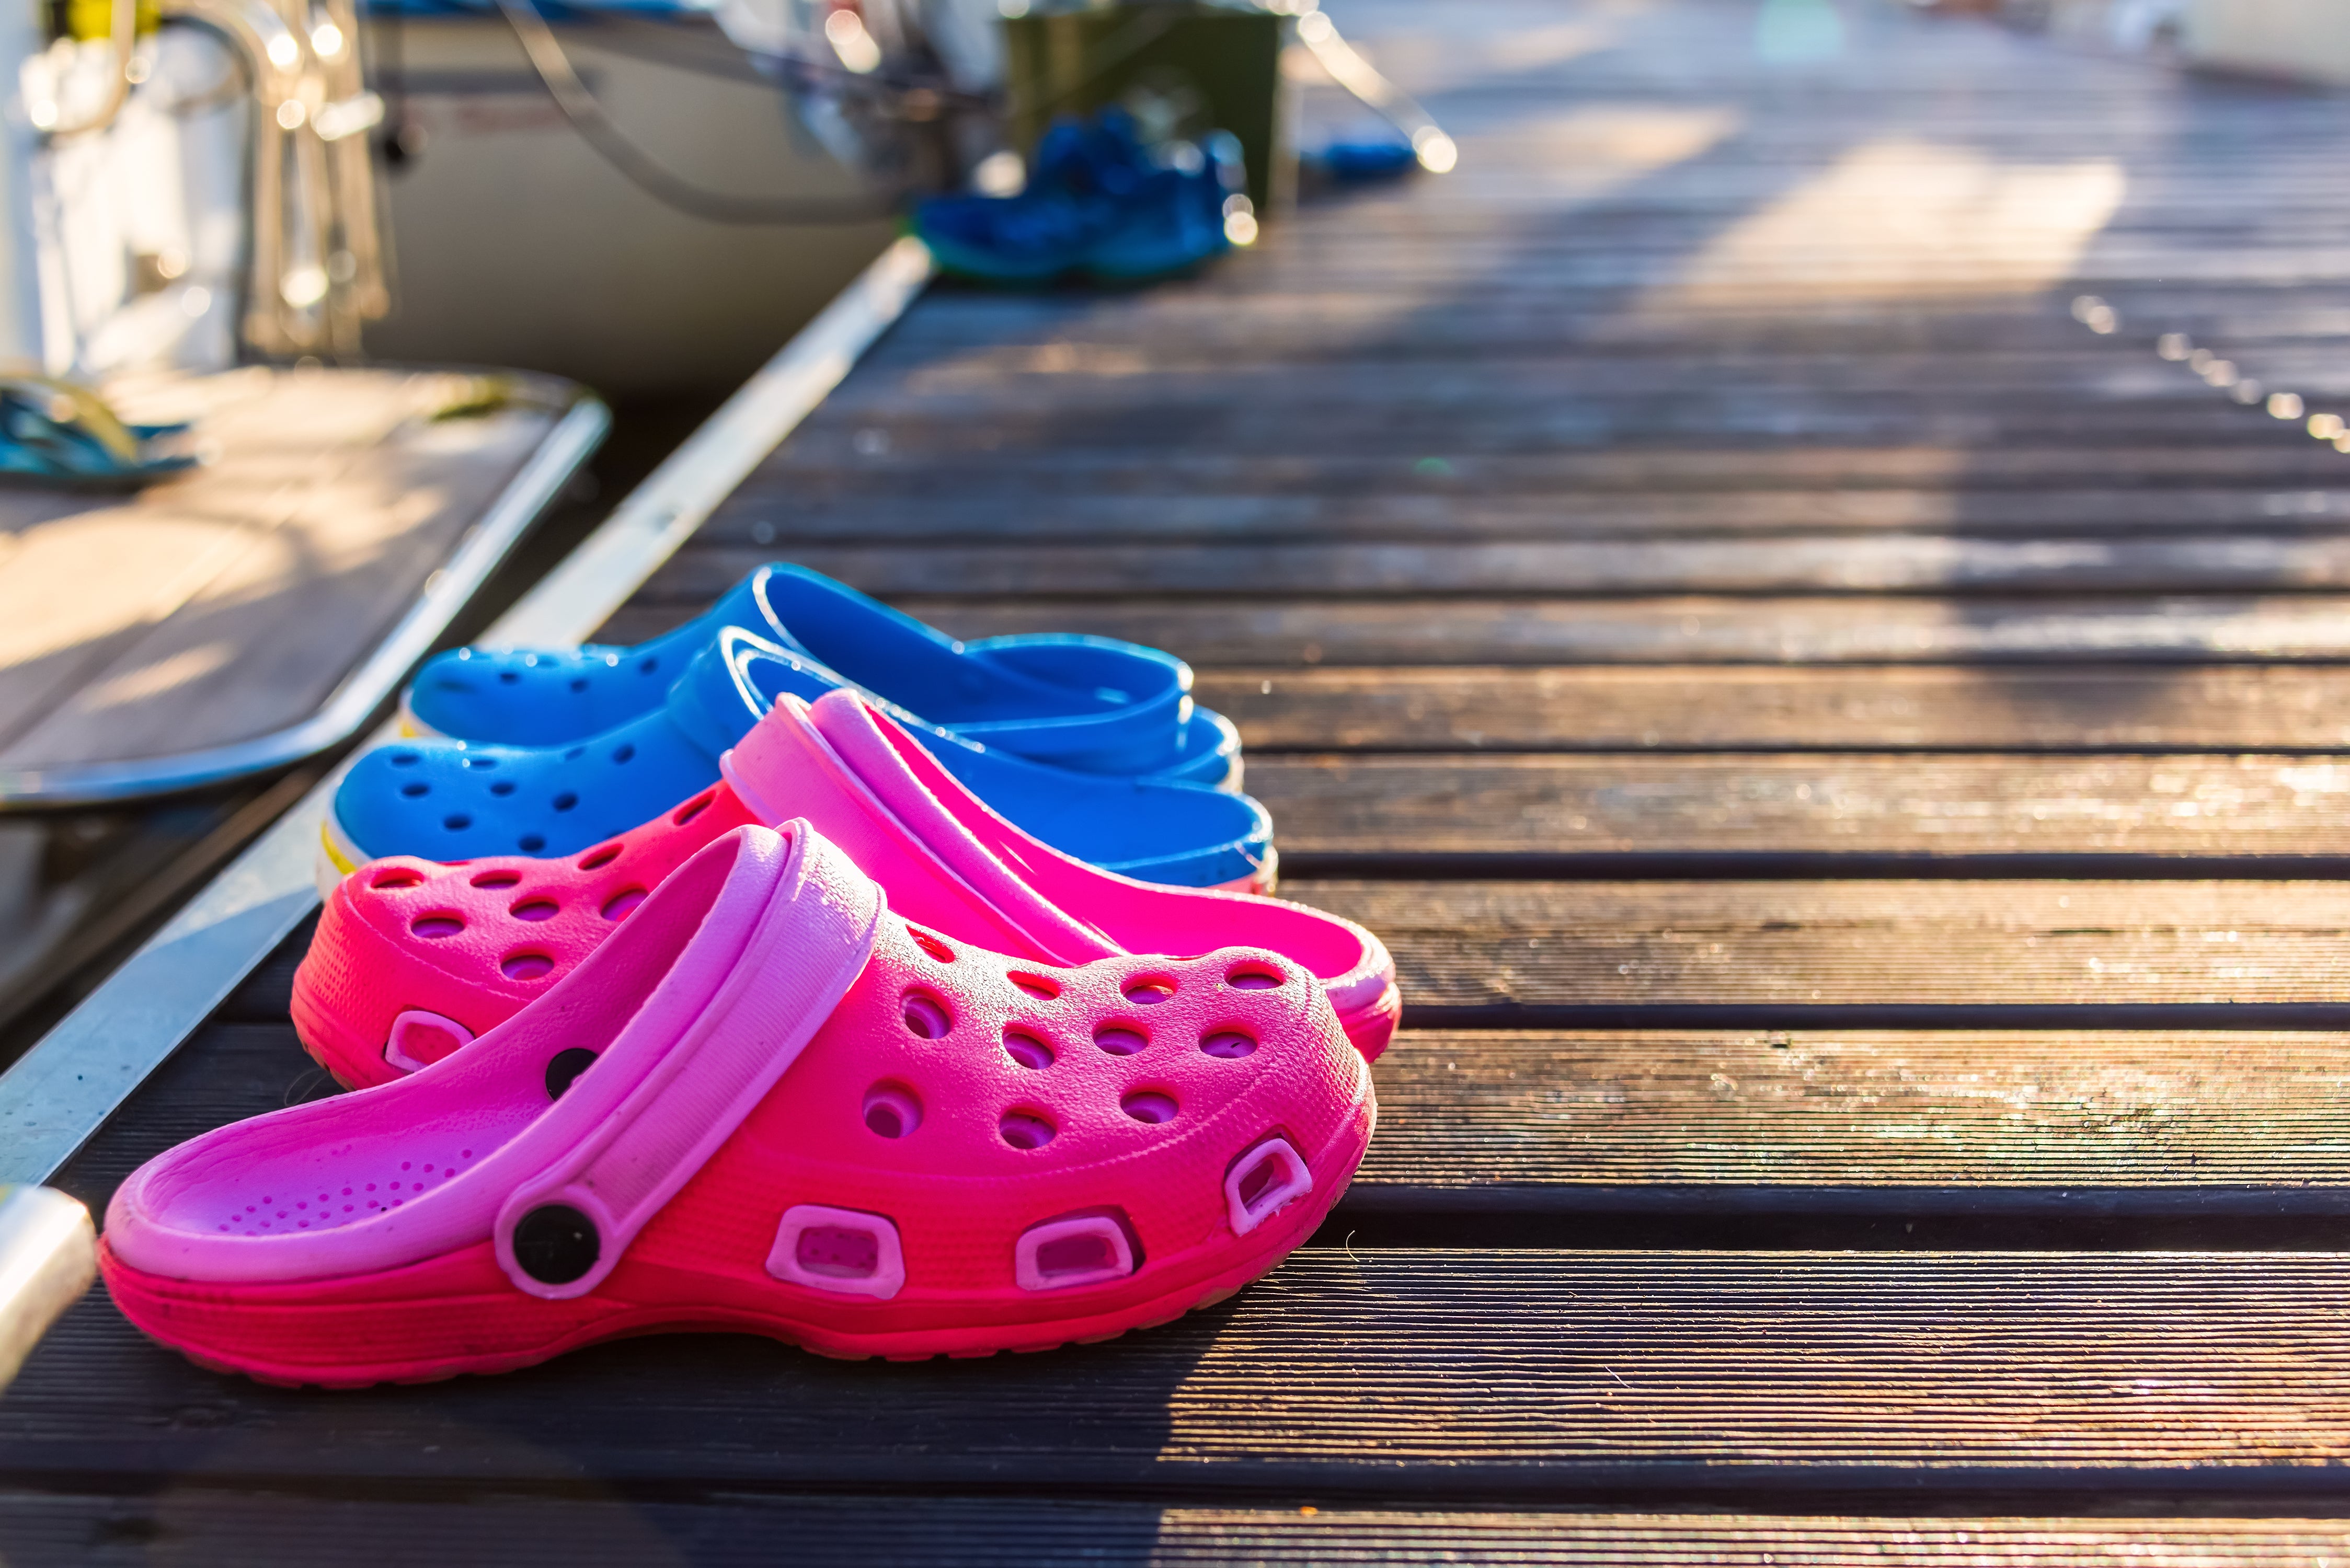 Crocs launches third annual giveaway of free shoes and scrubs to